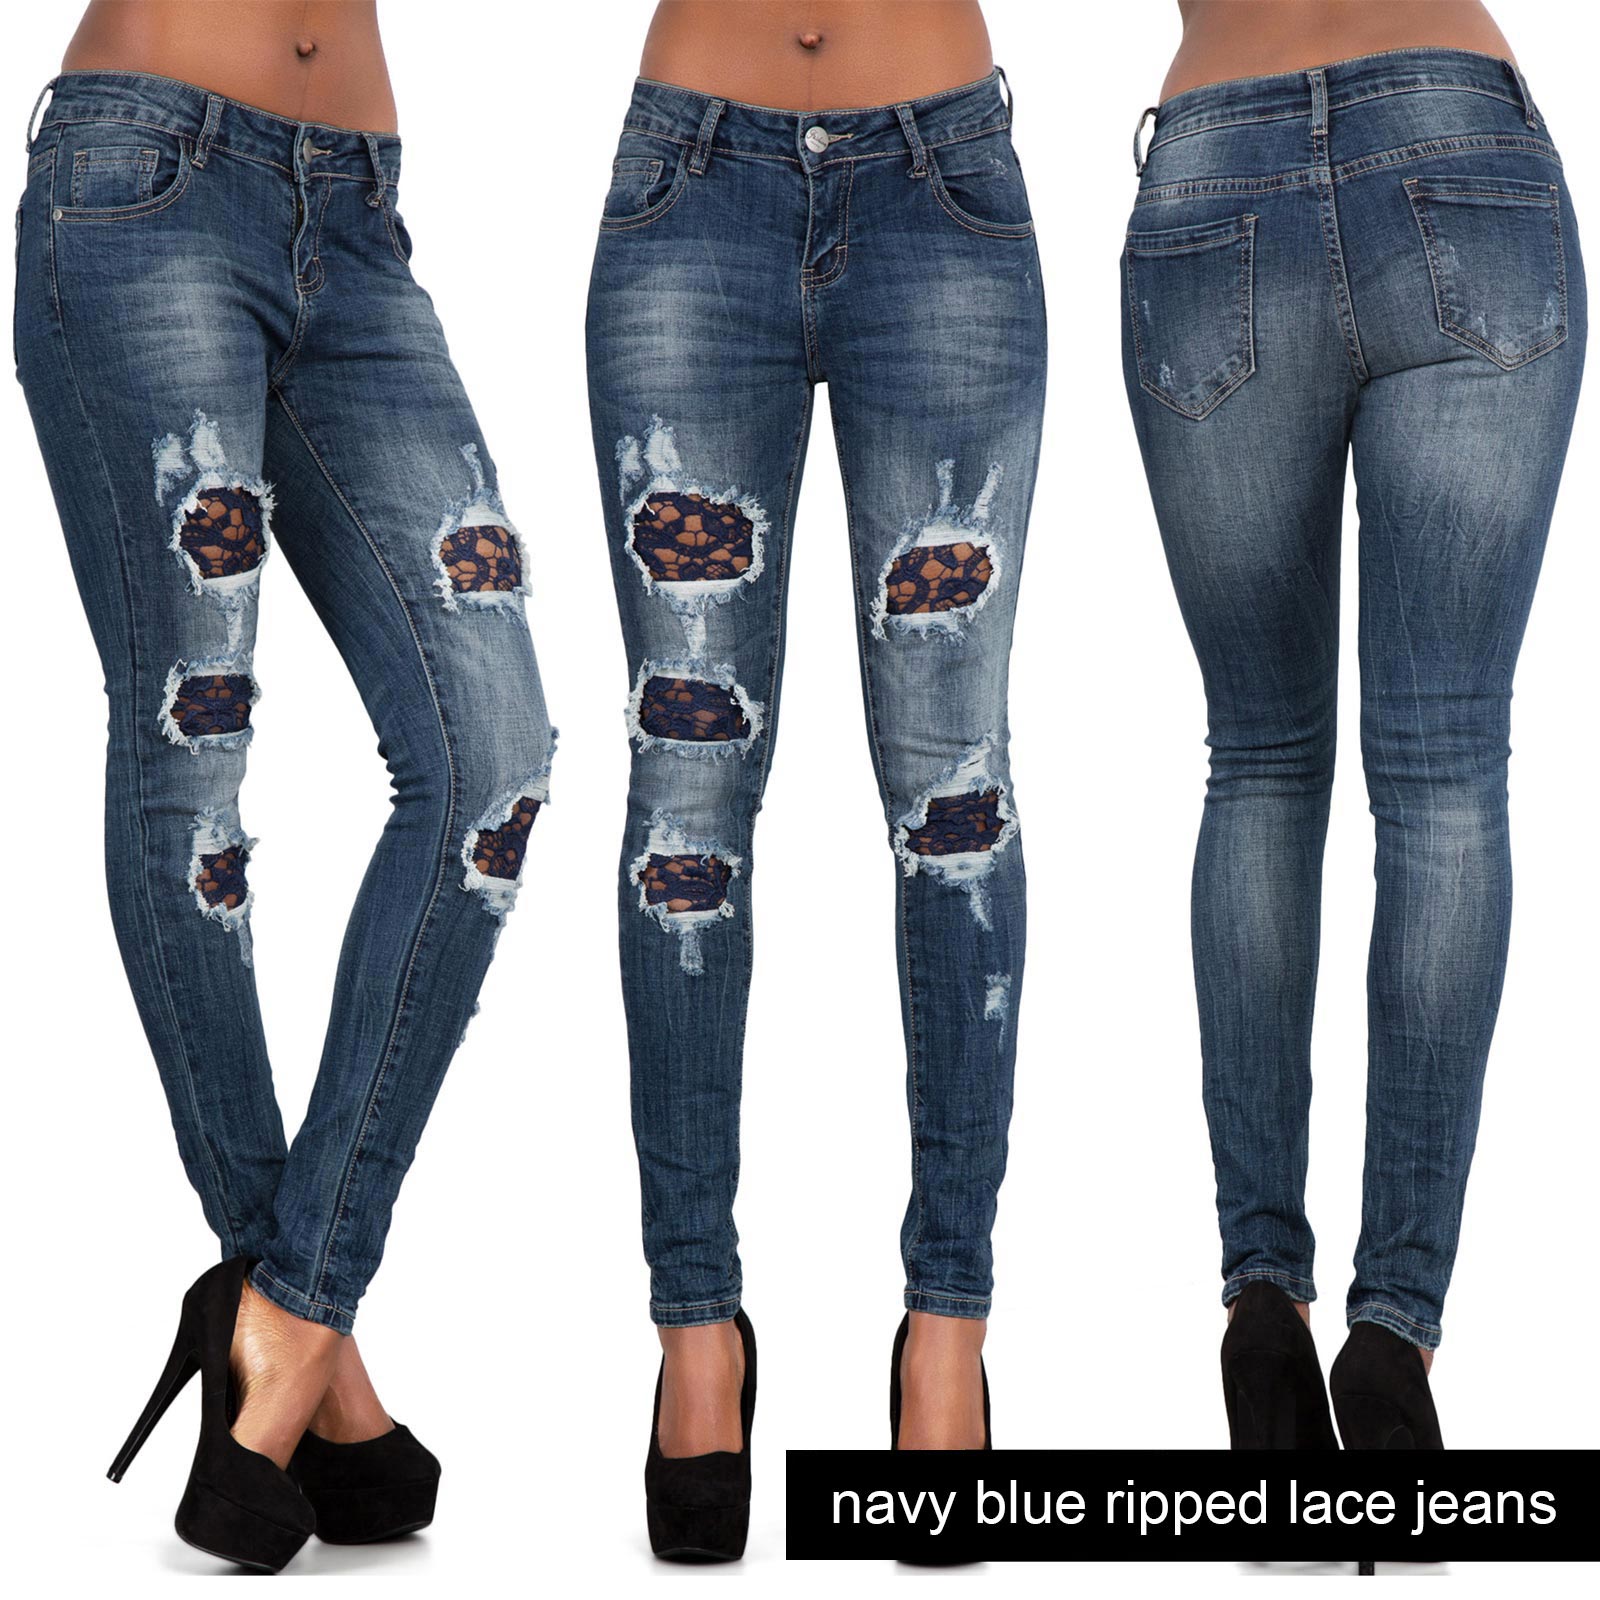 WOMENS LADIES BLACK BLUE SKINNY RIPPED LACE CUT OUT BOW JEANS DENIM ...